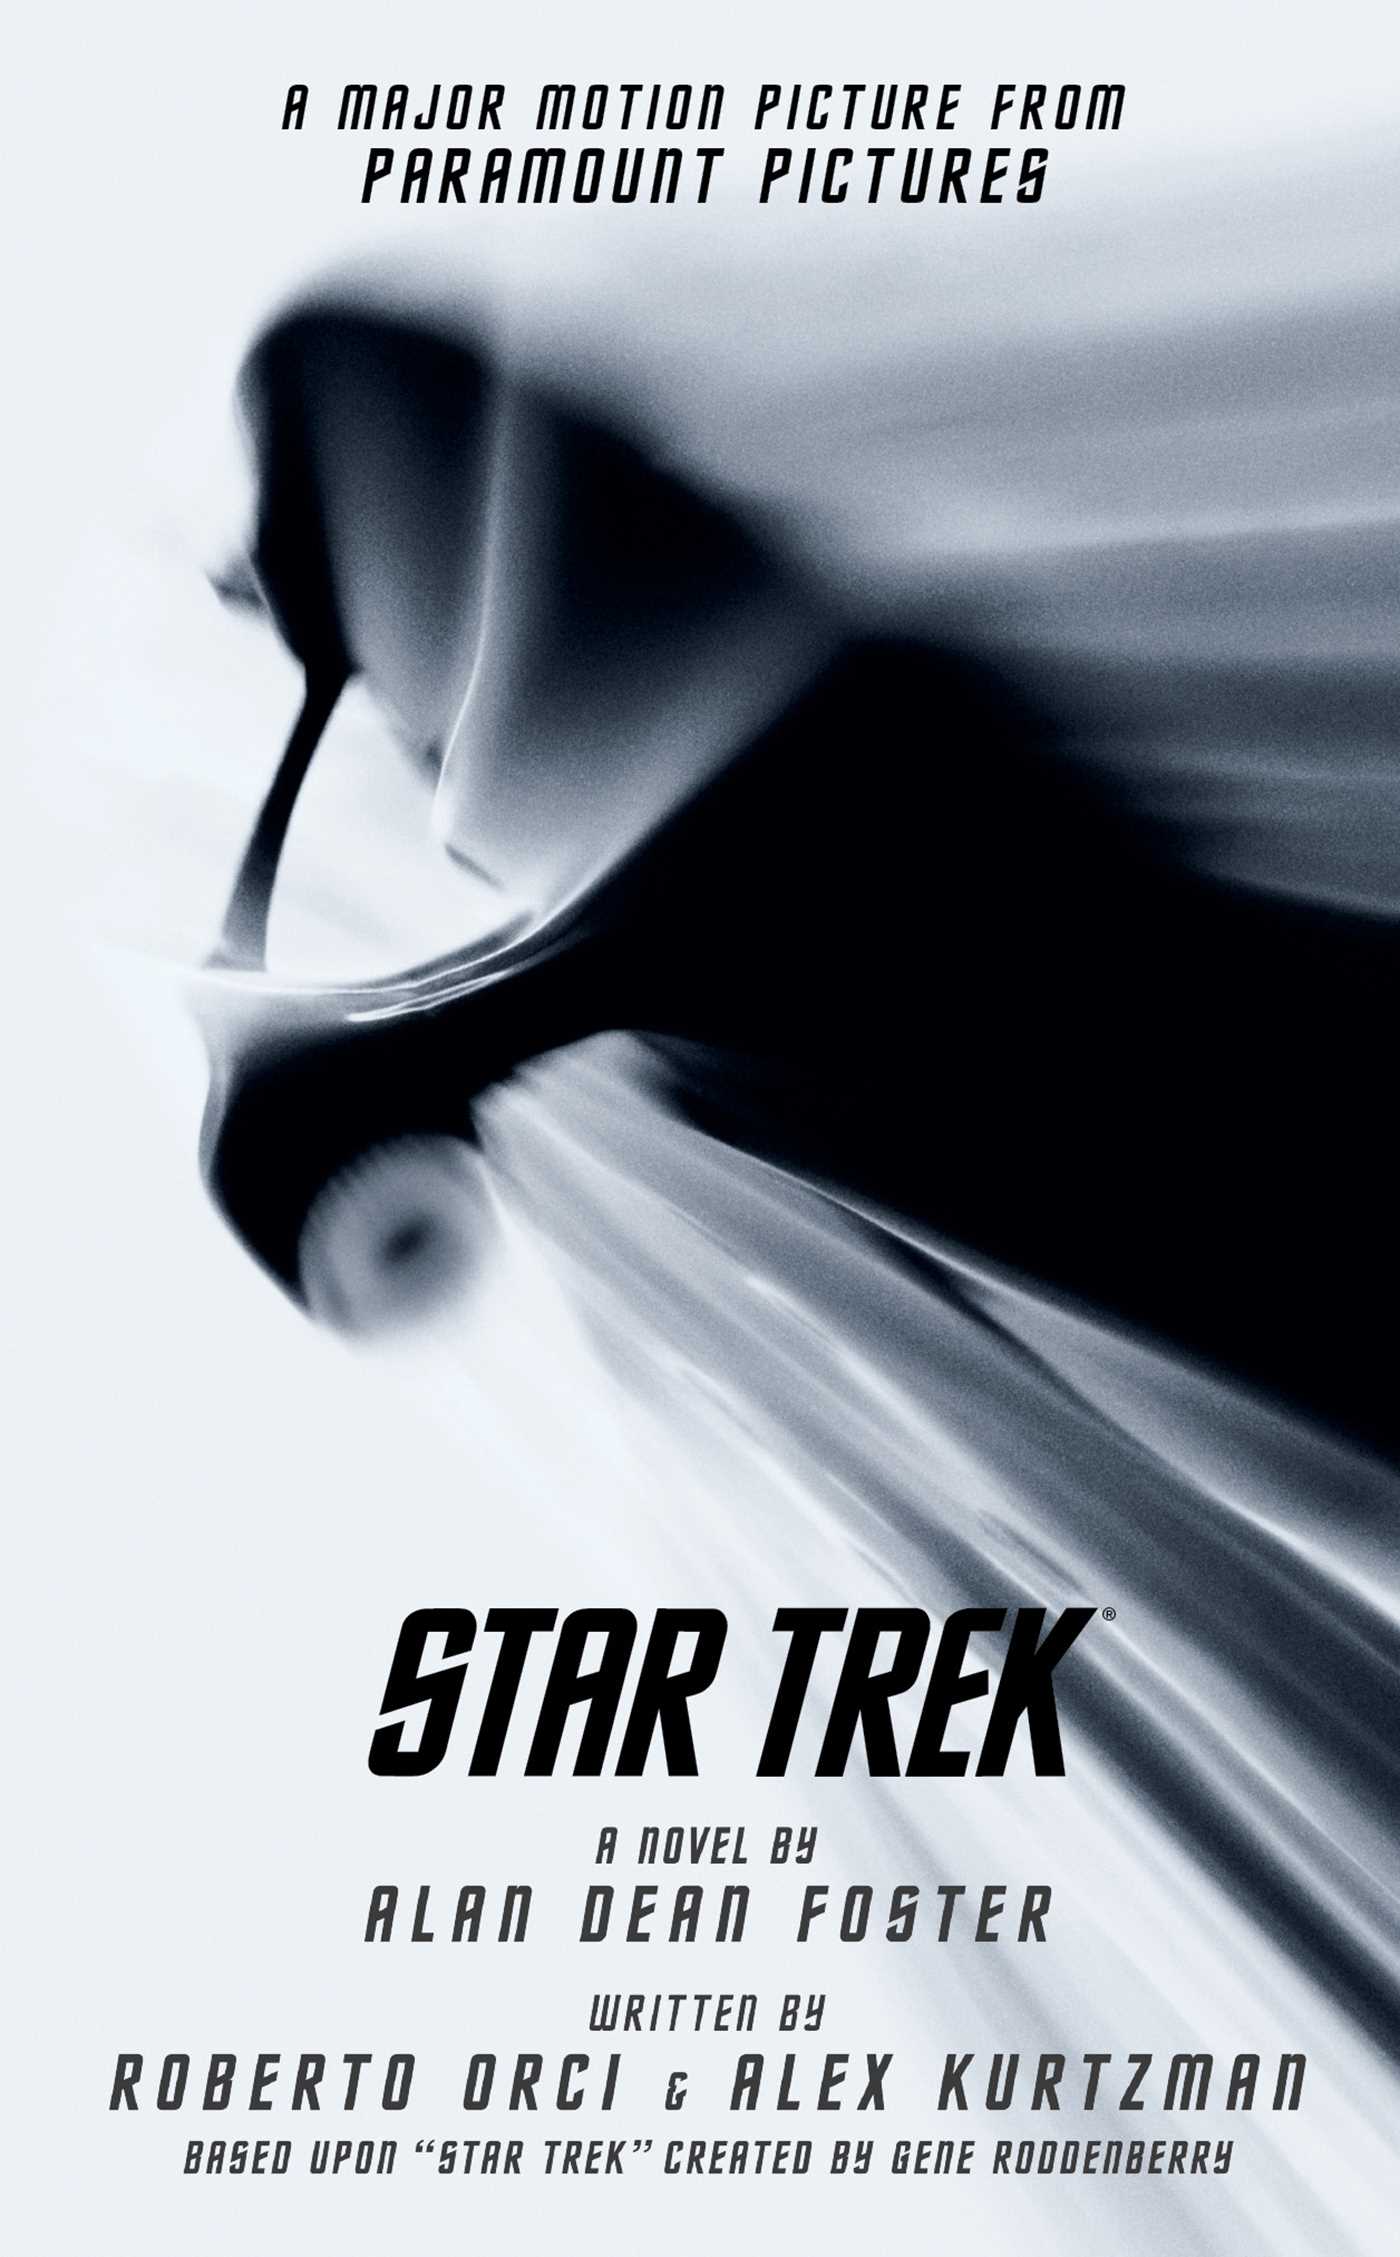 Star Trek Movie Tie In EBook By Alan Dean Foster. Official Publisher Page. Simon & Schuster